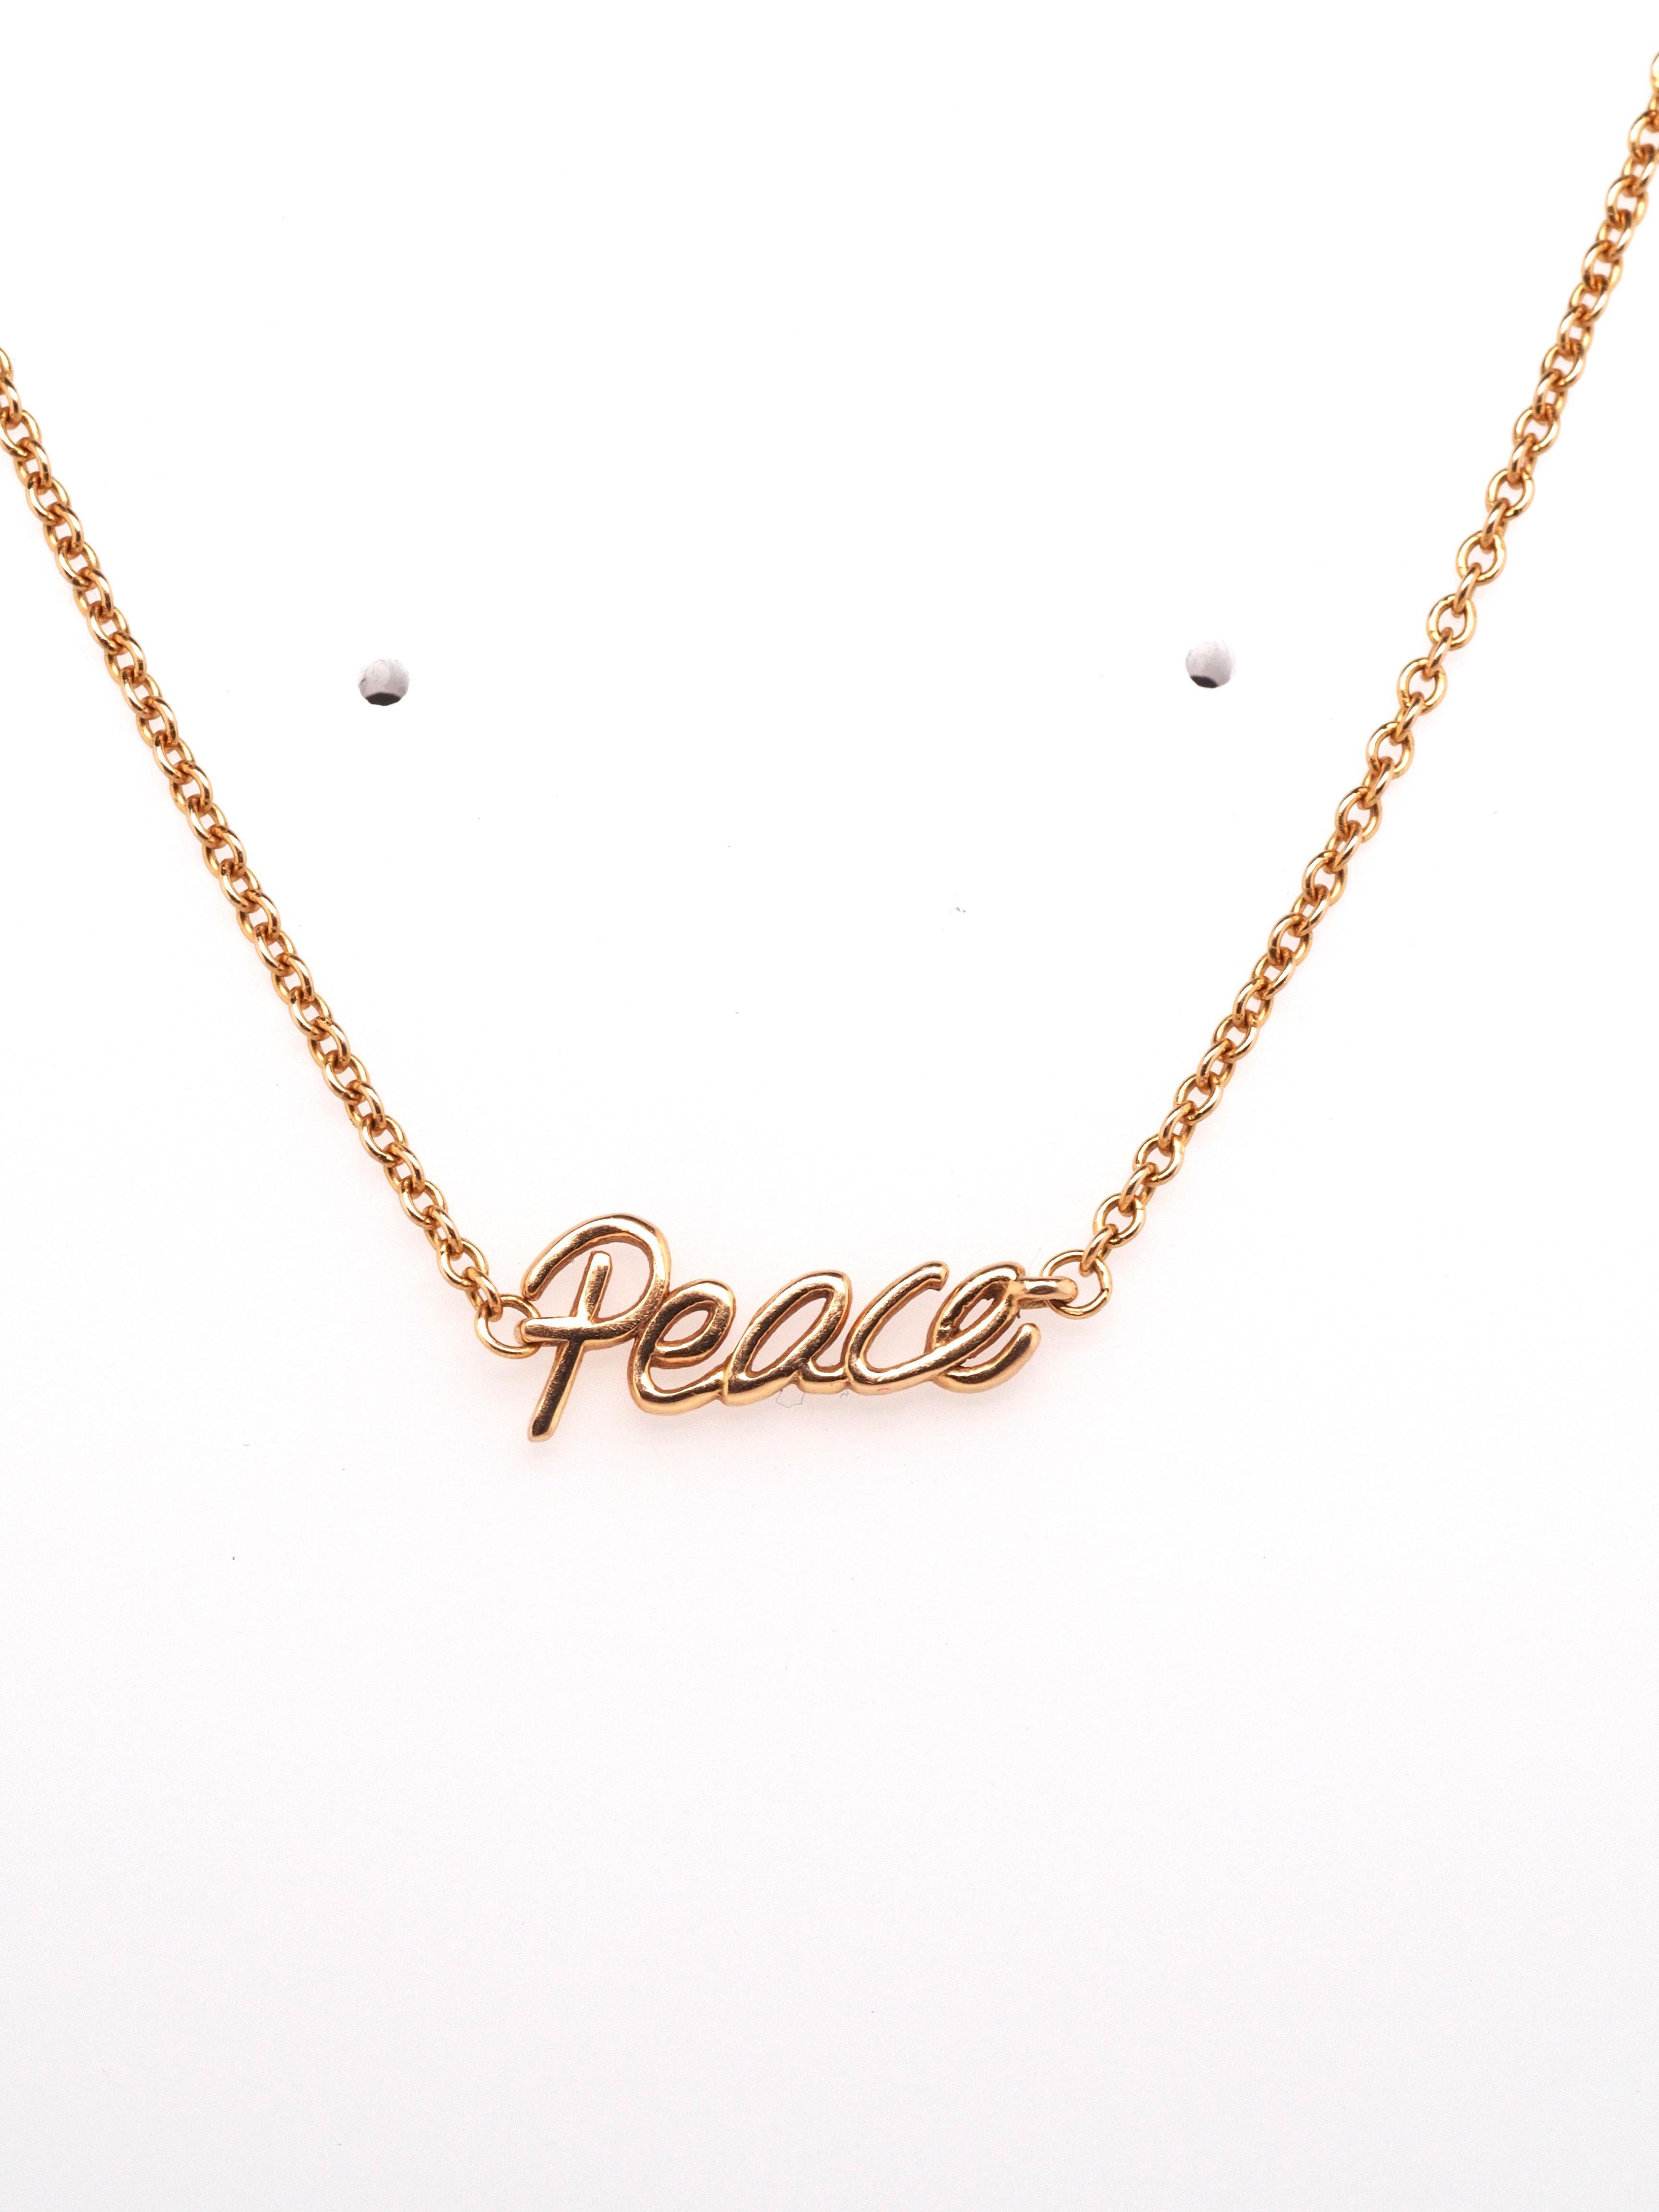 2020 Tiffany and Co 18K Yellow Gold “Peace” Bracelet For Sale